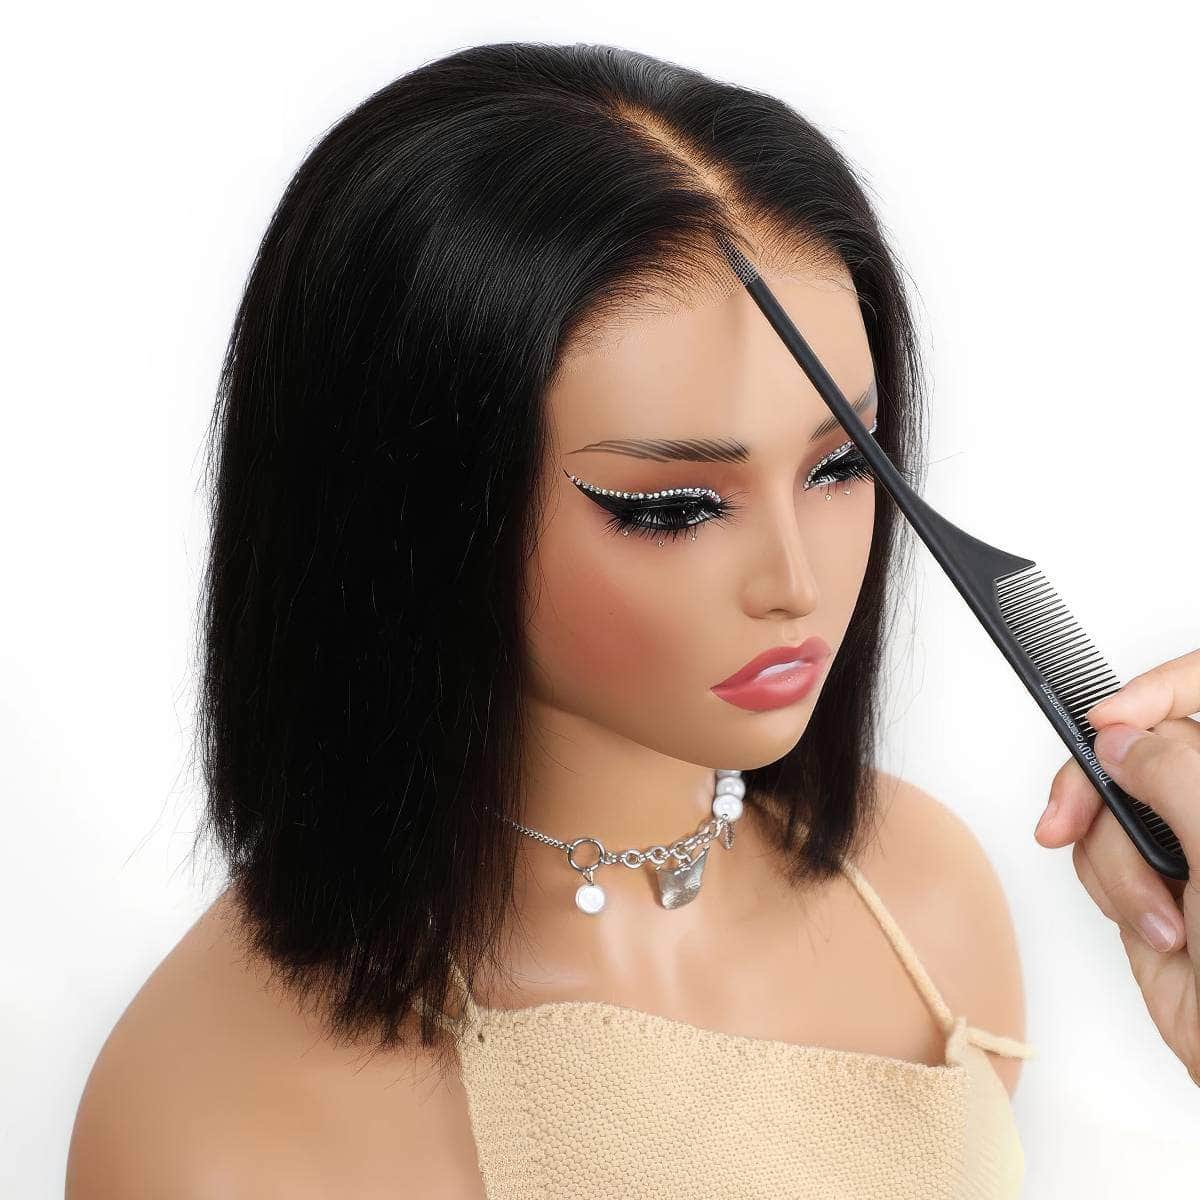 Wear And Go Glueless Human Hair Wig - Bob HD Lace Straight Short Bob, 6x4 Lace Frontal, Pre-Plucked Human Wigs Ready To Go